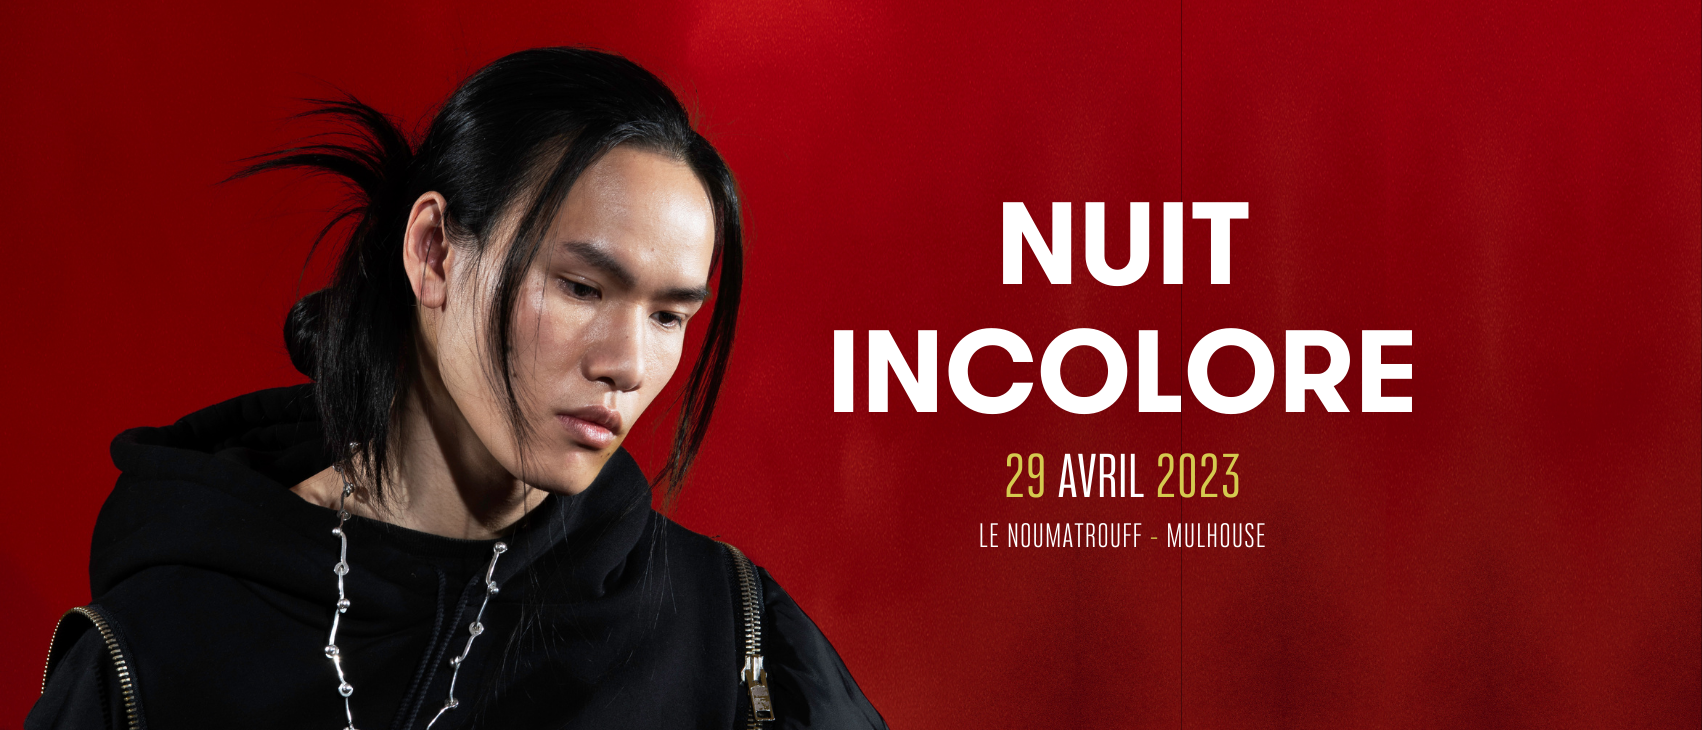 NUIT INCOLORE